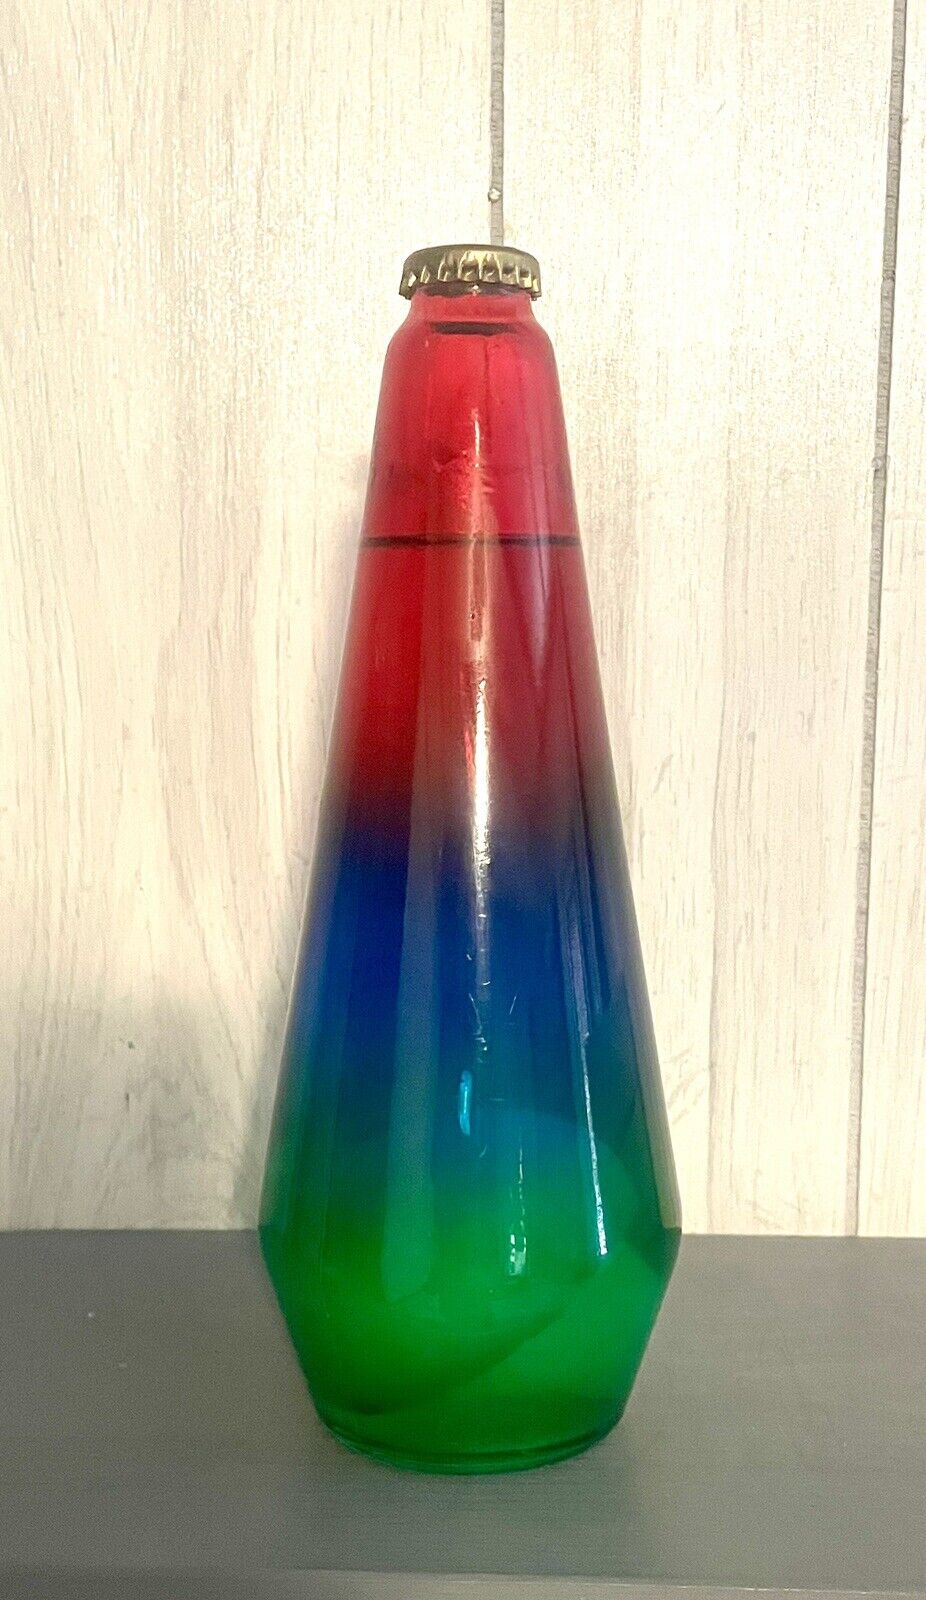 Authentic Lava Lamp Replacement Rainbow Bottle 9.5” Blue Red Green Vintage